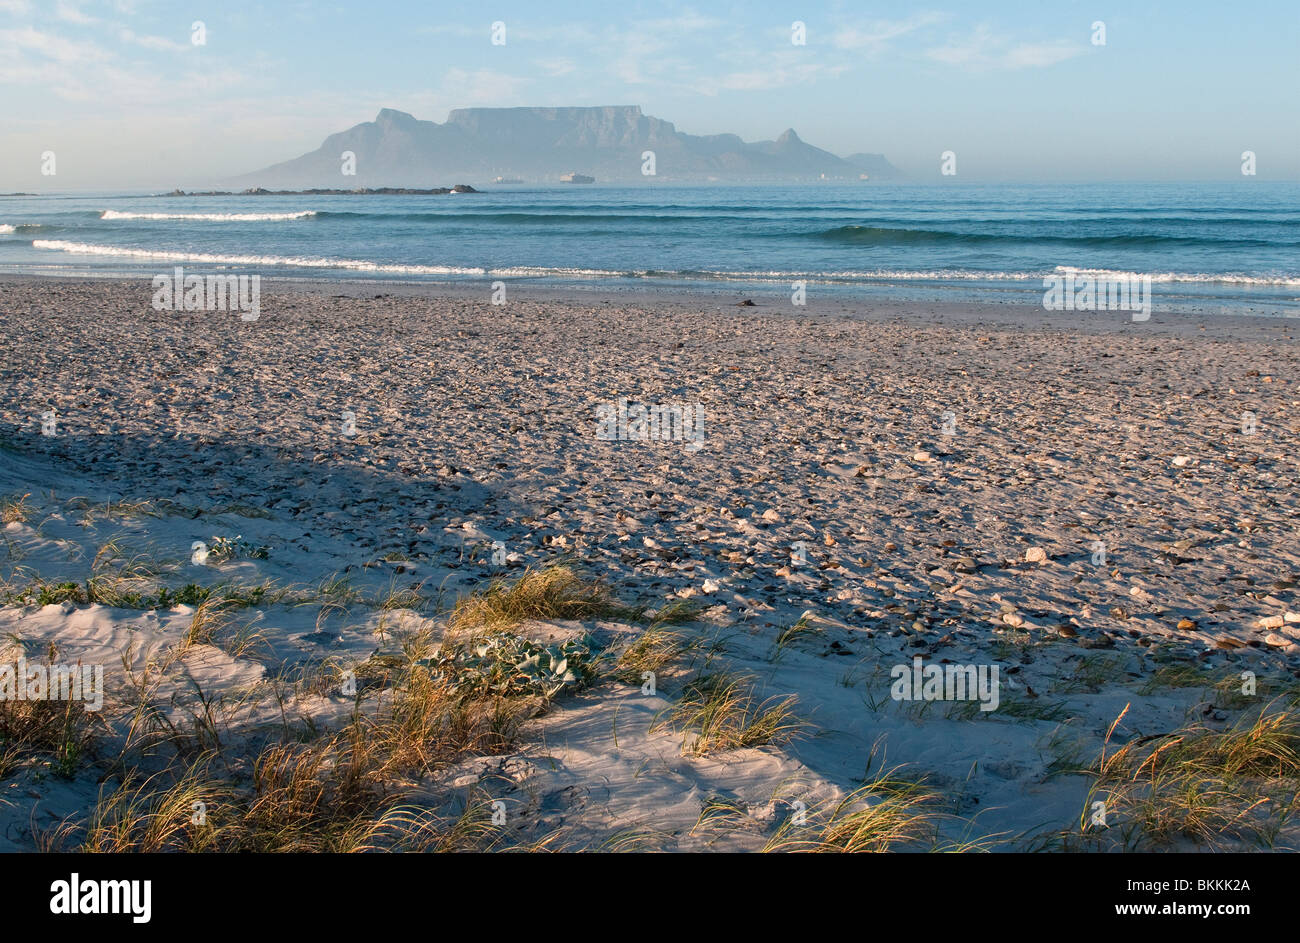 Spectacular View of Table Mountain from Blouberg Beach at Sunrise. Cape Town, South Africa Stock Photo